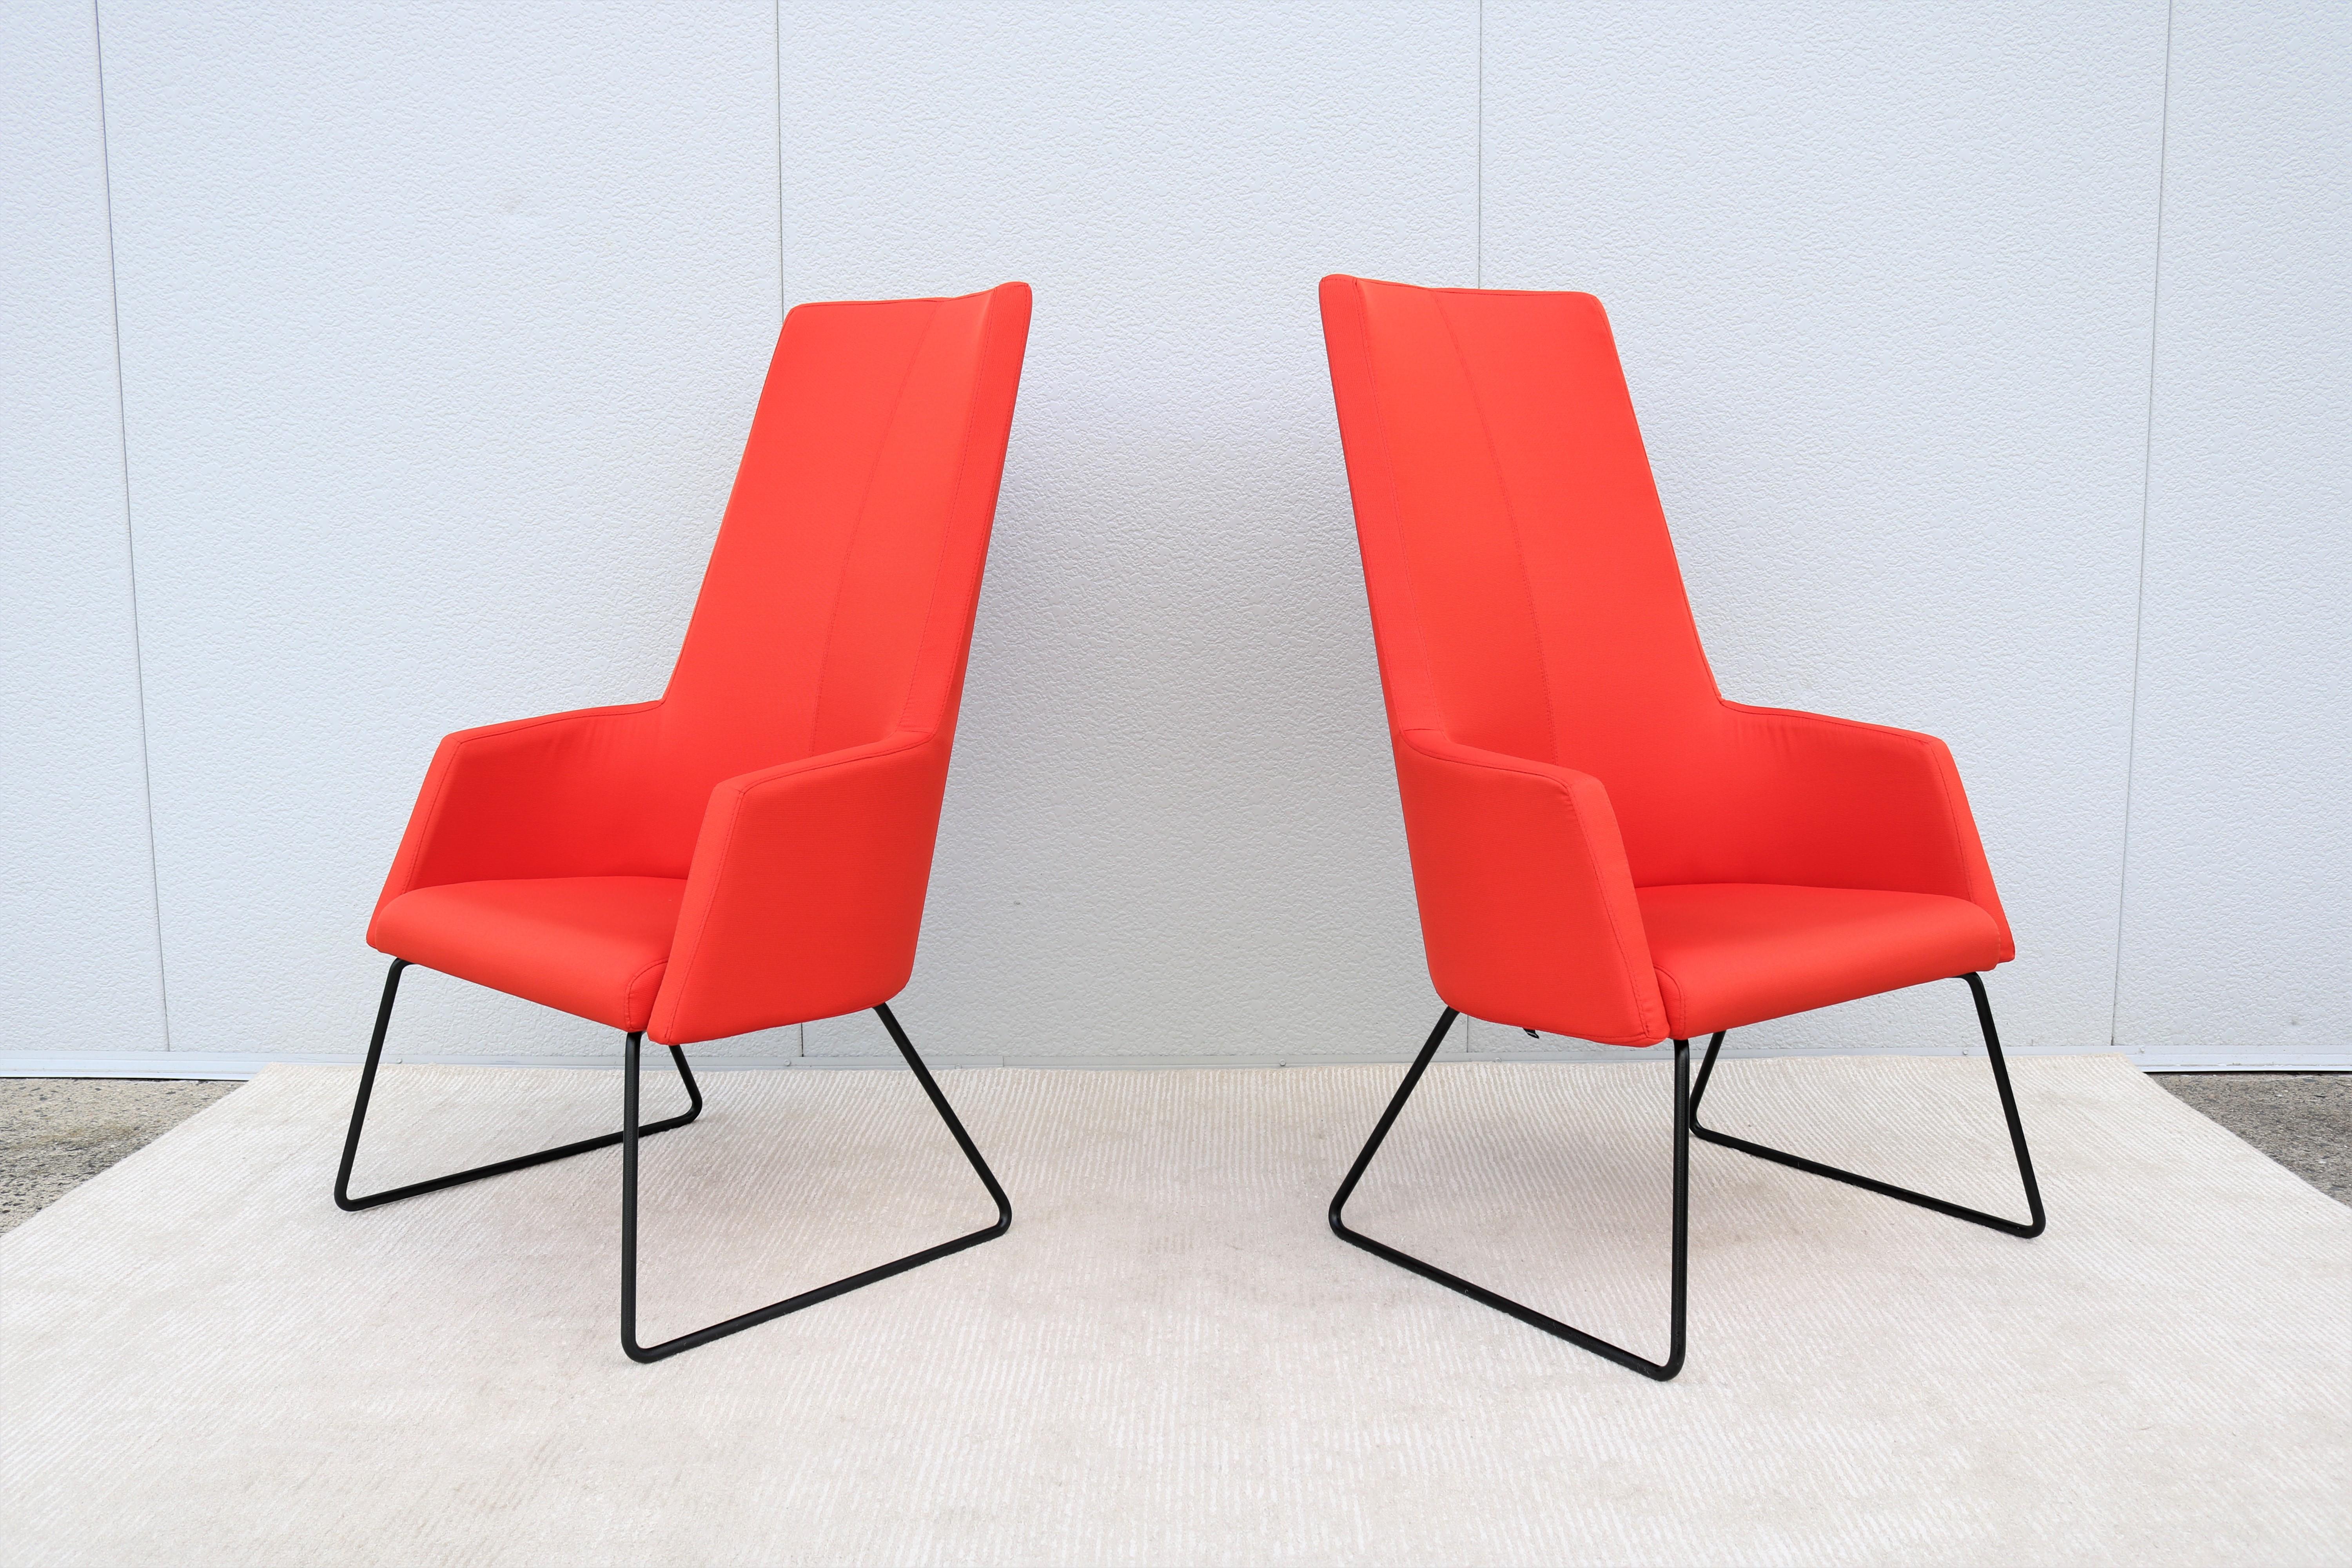 Canadian Contemporary Modern Rouillard Solo High Back Red Lounge Chairs, a Pair For Sale